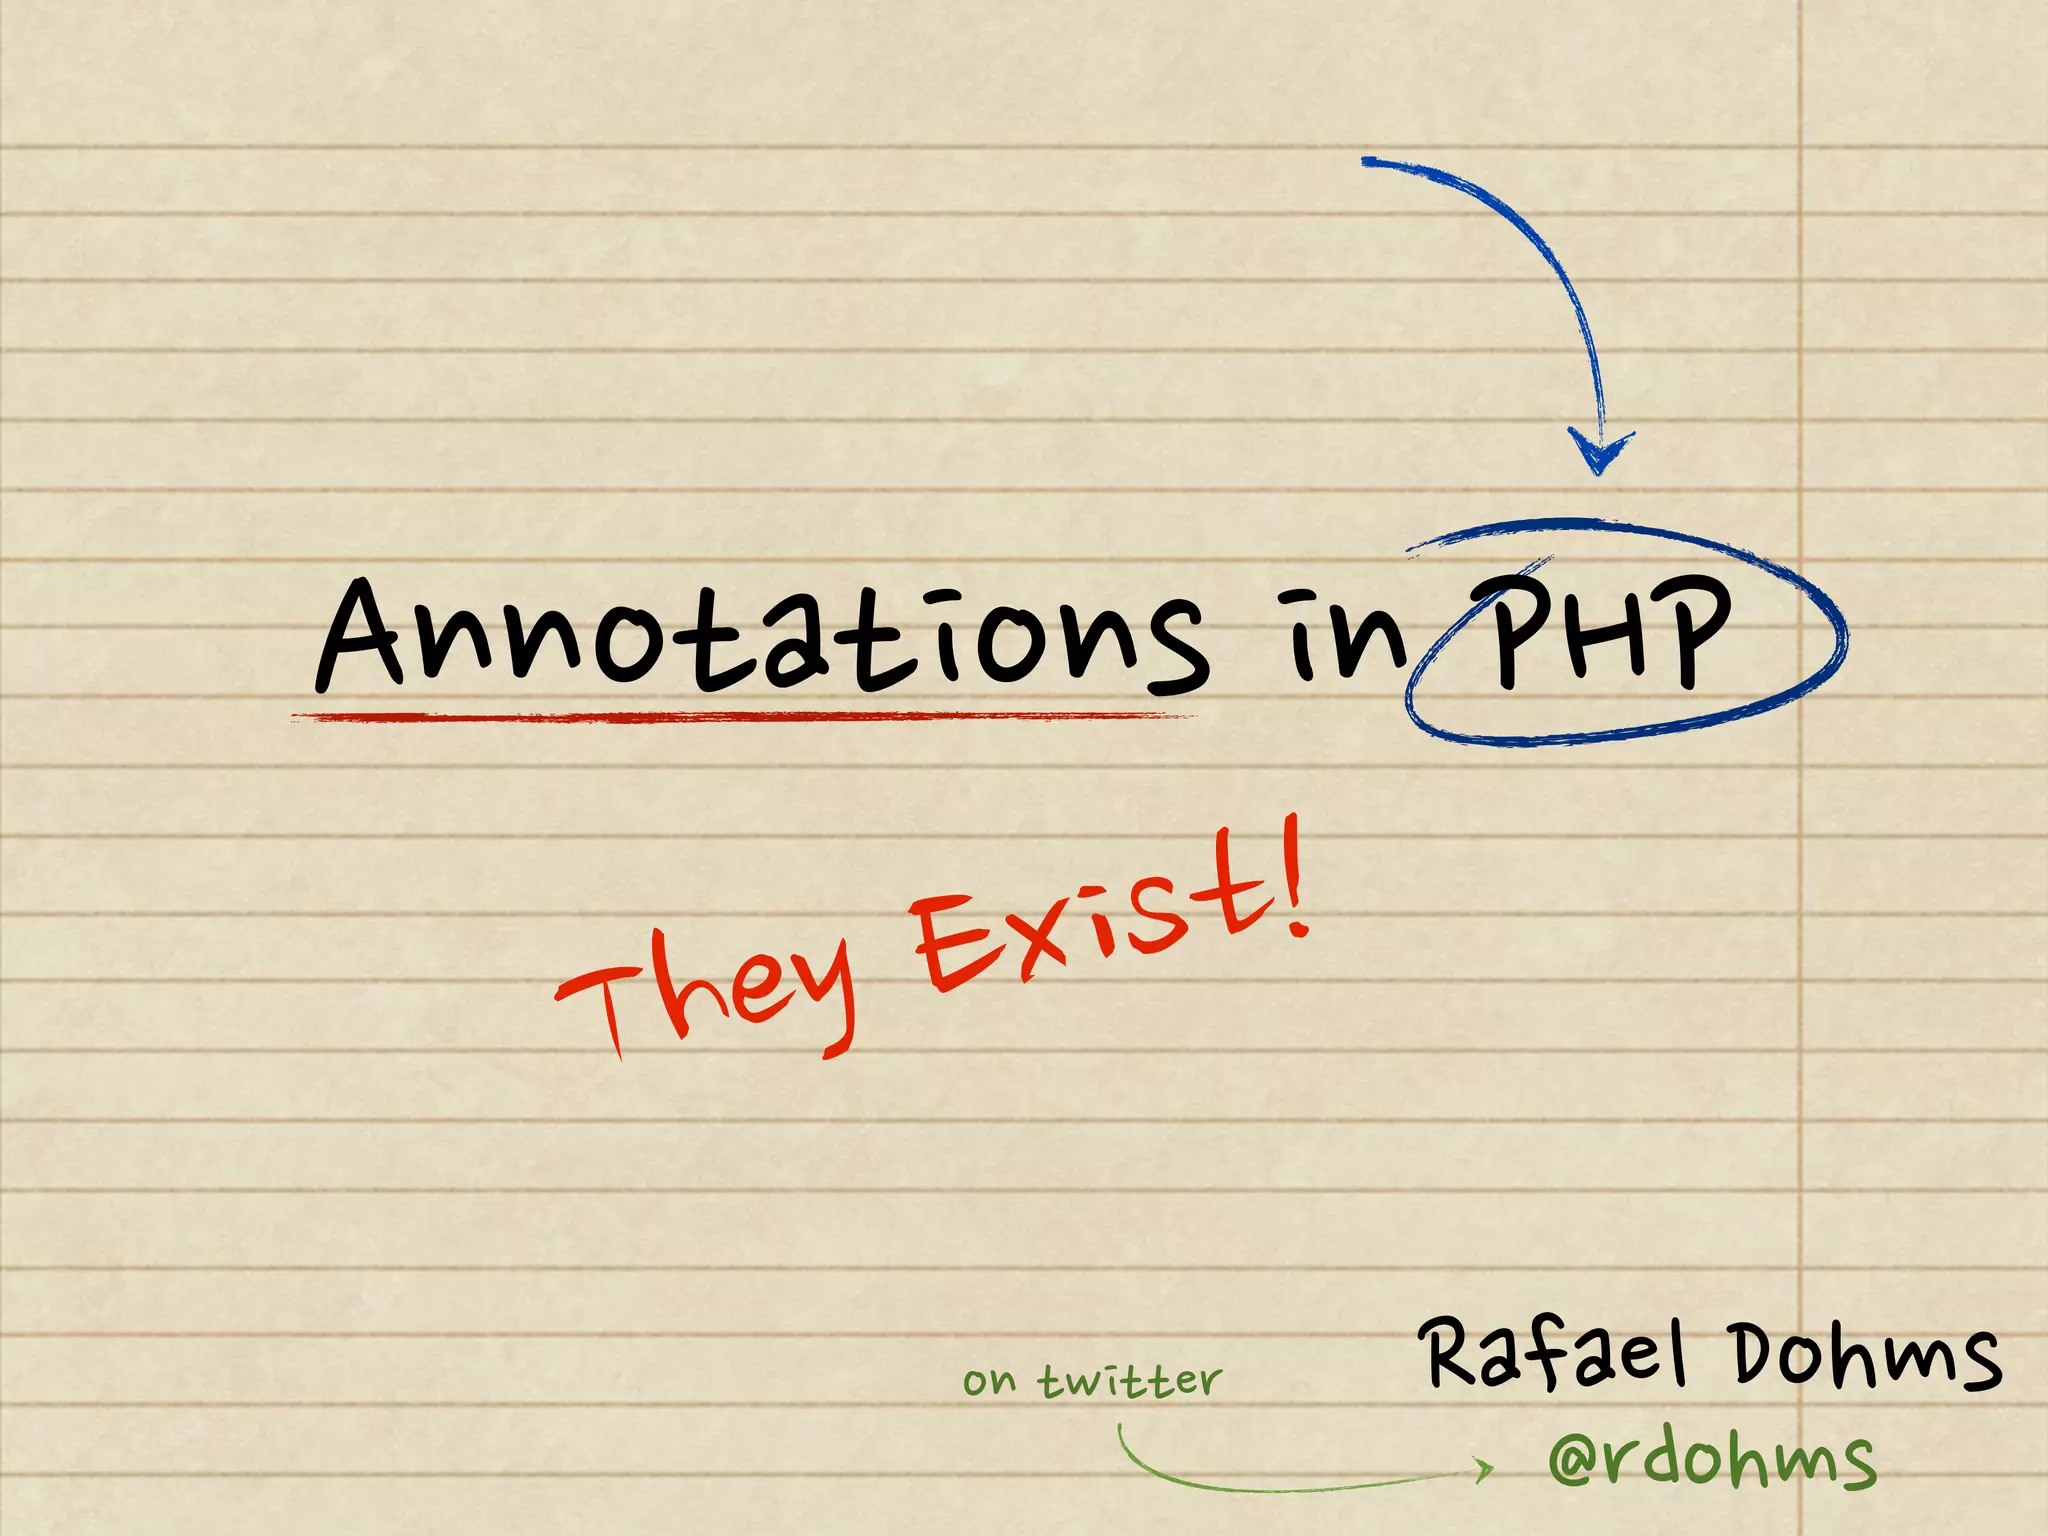 PHP Annotations: They exist!